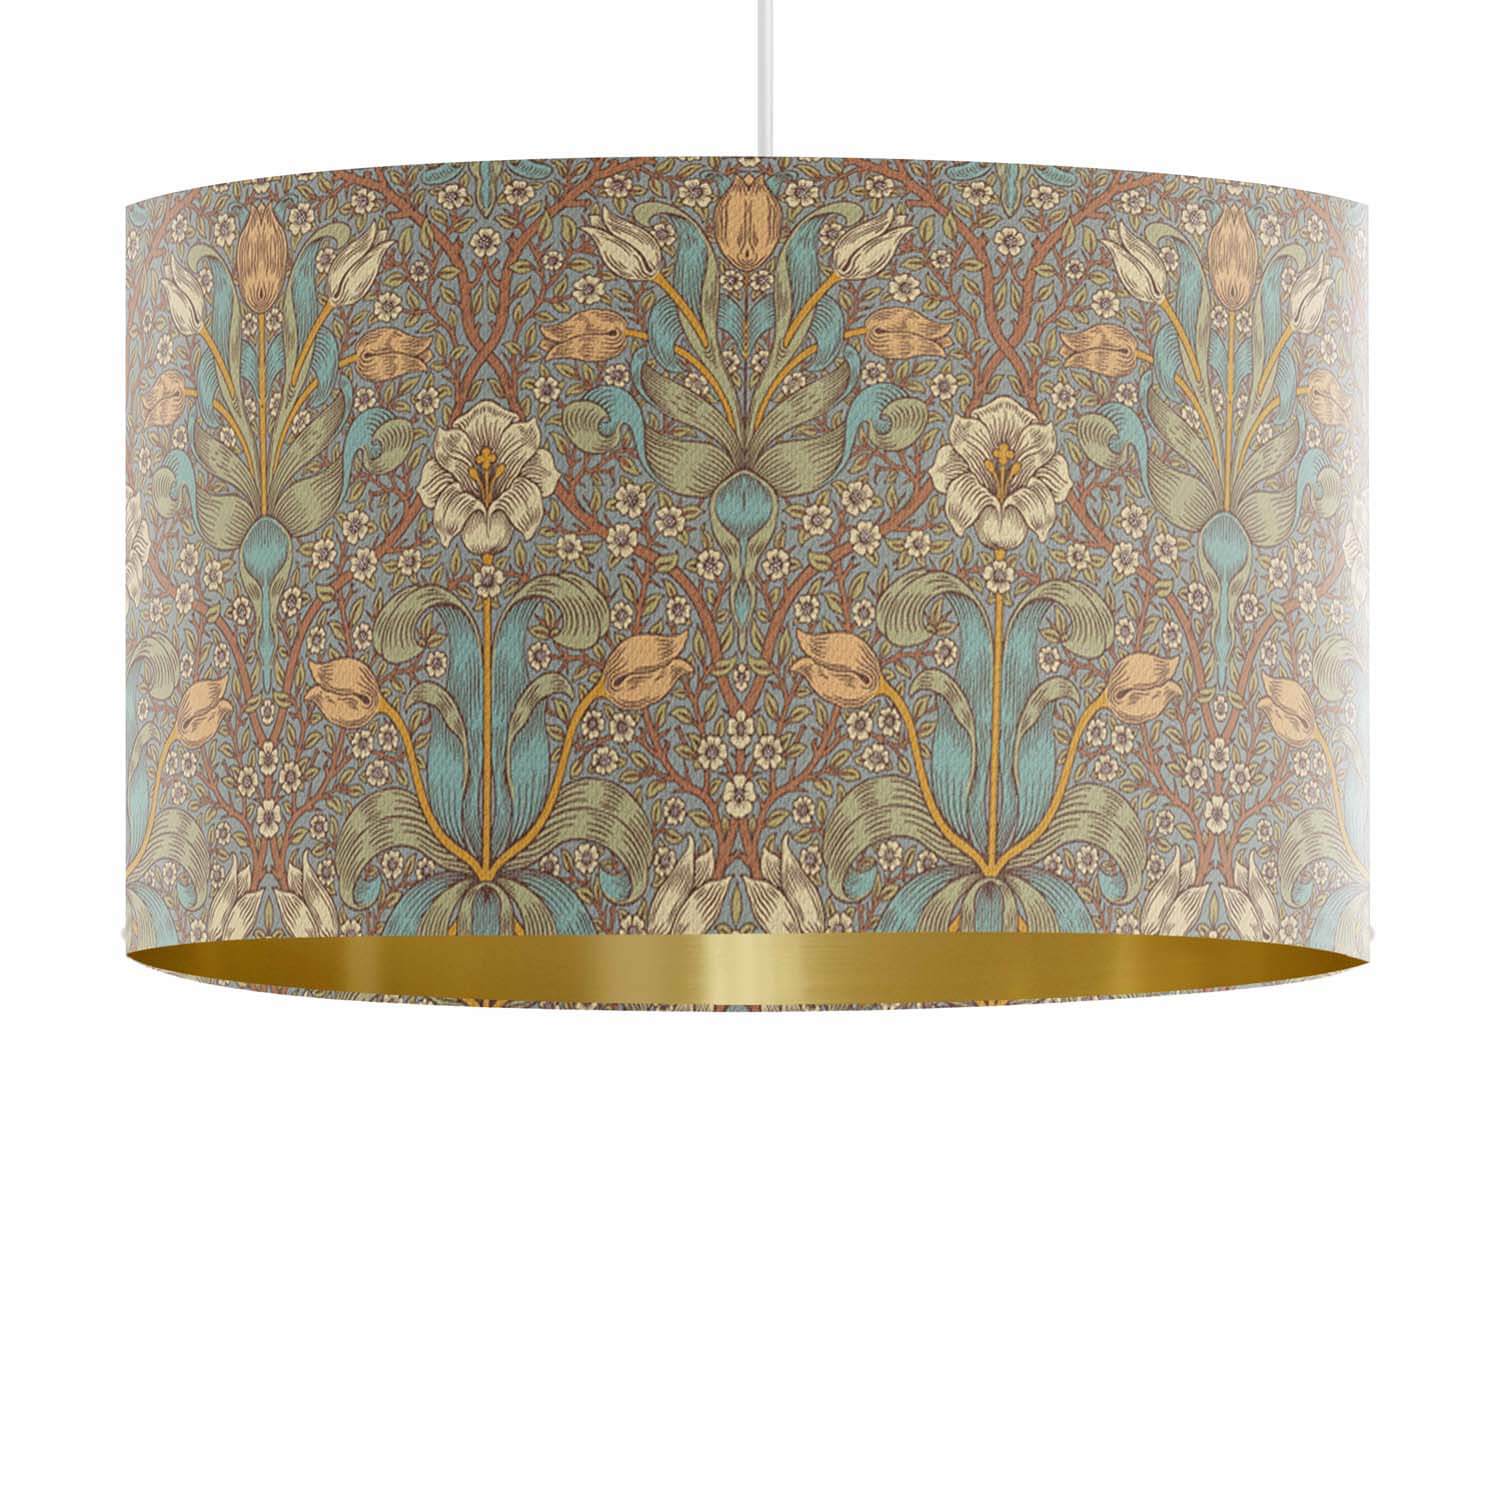 Spring Thicket - William Morris Gallery Lampshade